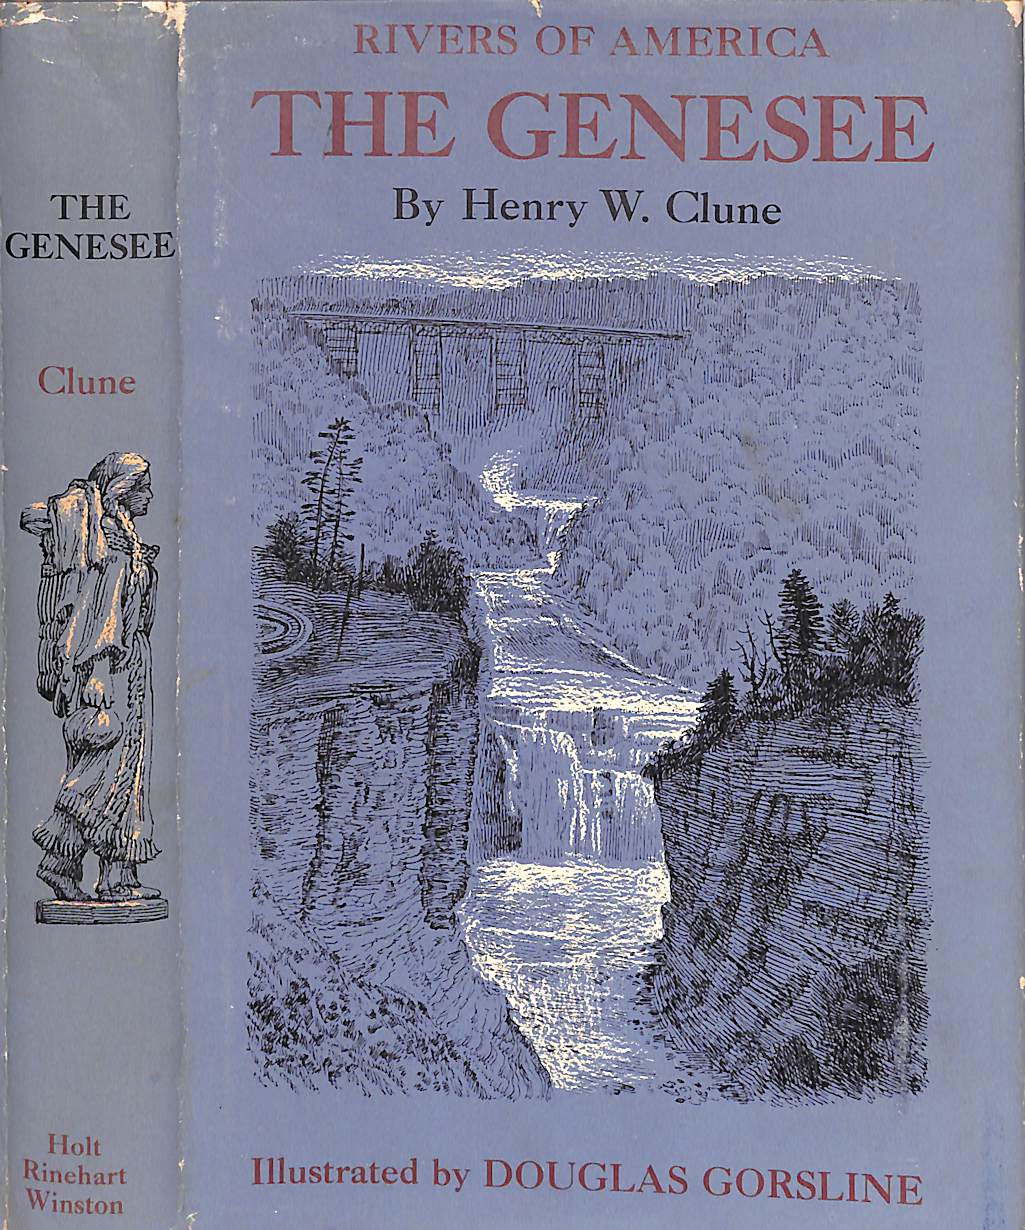 "The Genesee Rivers Of America" 1963 CLUNE, Henry W.